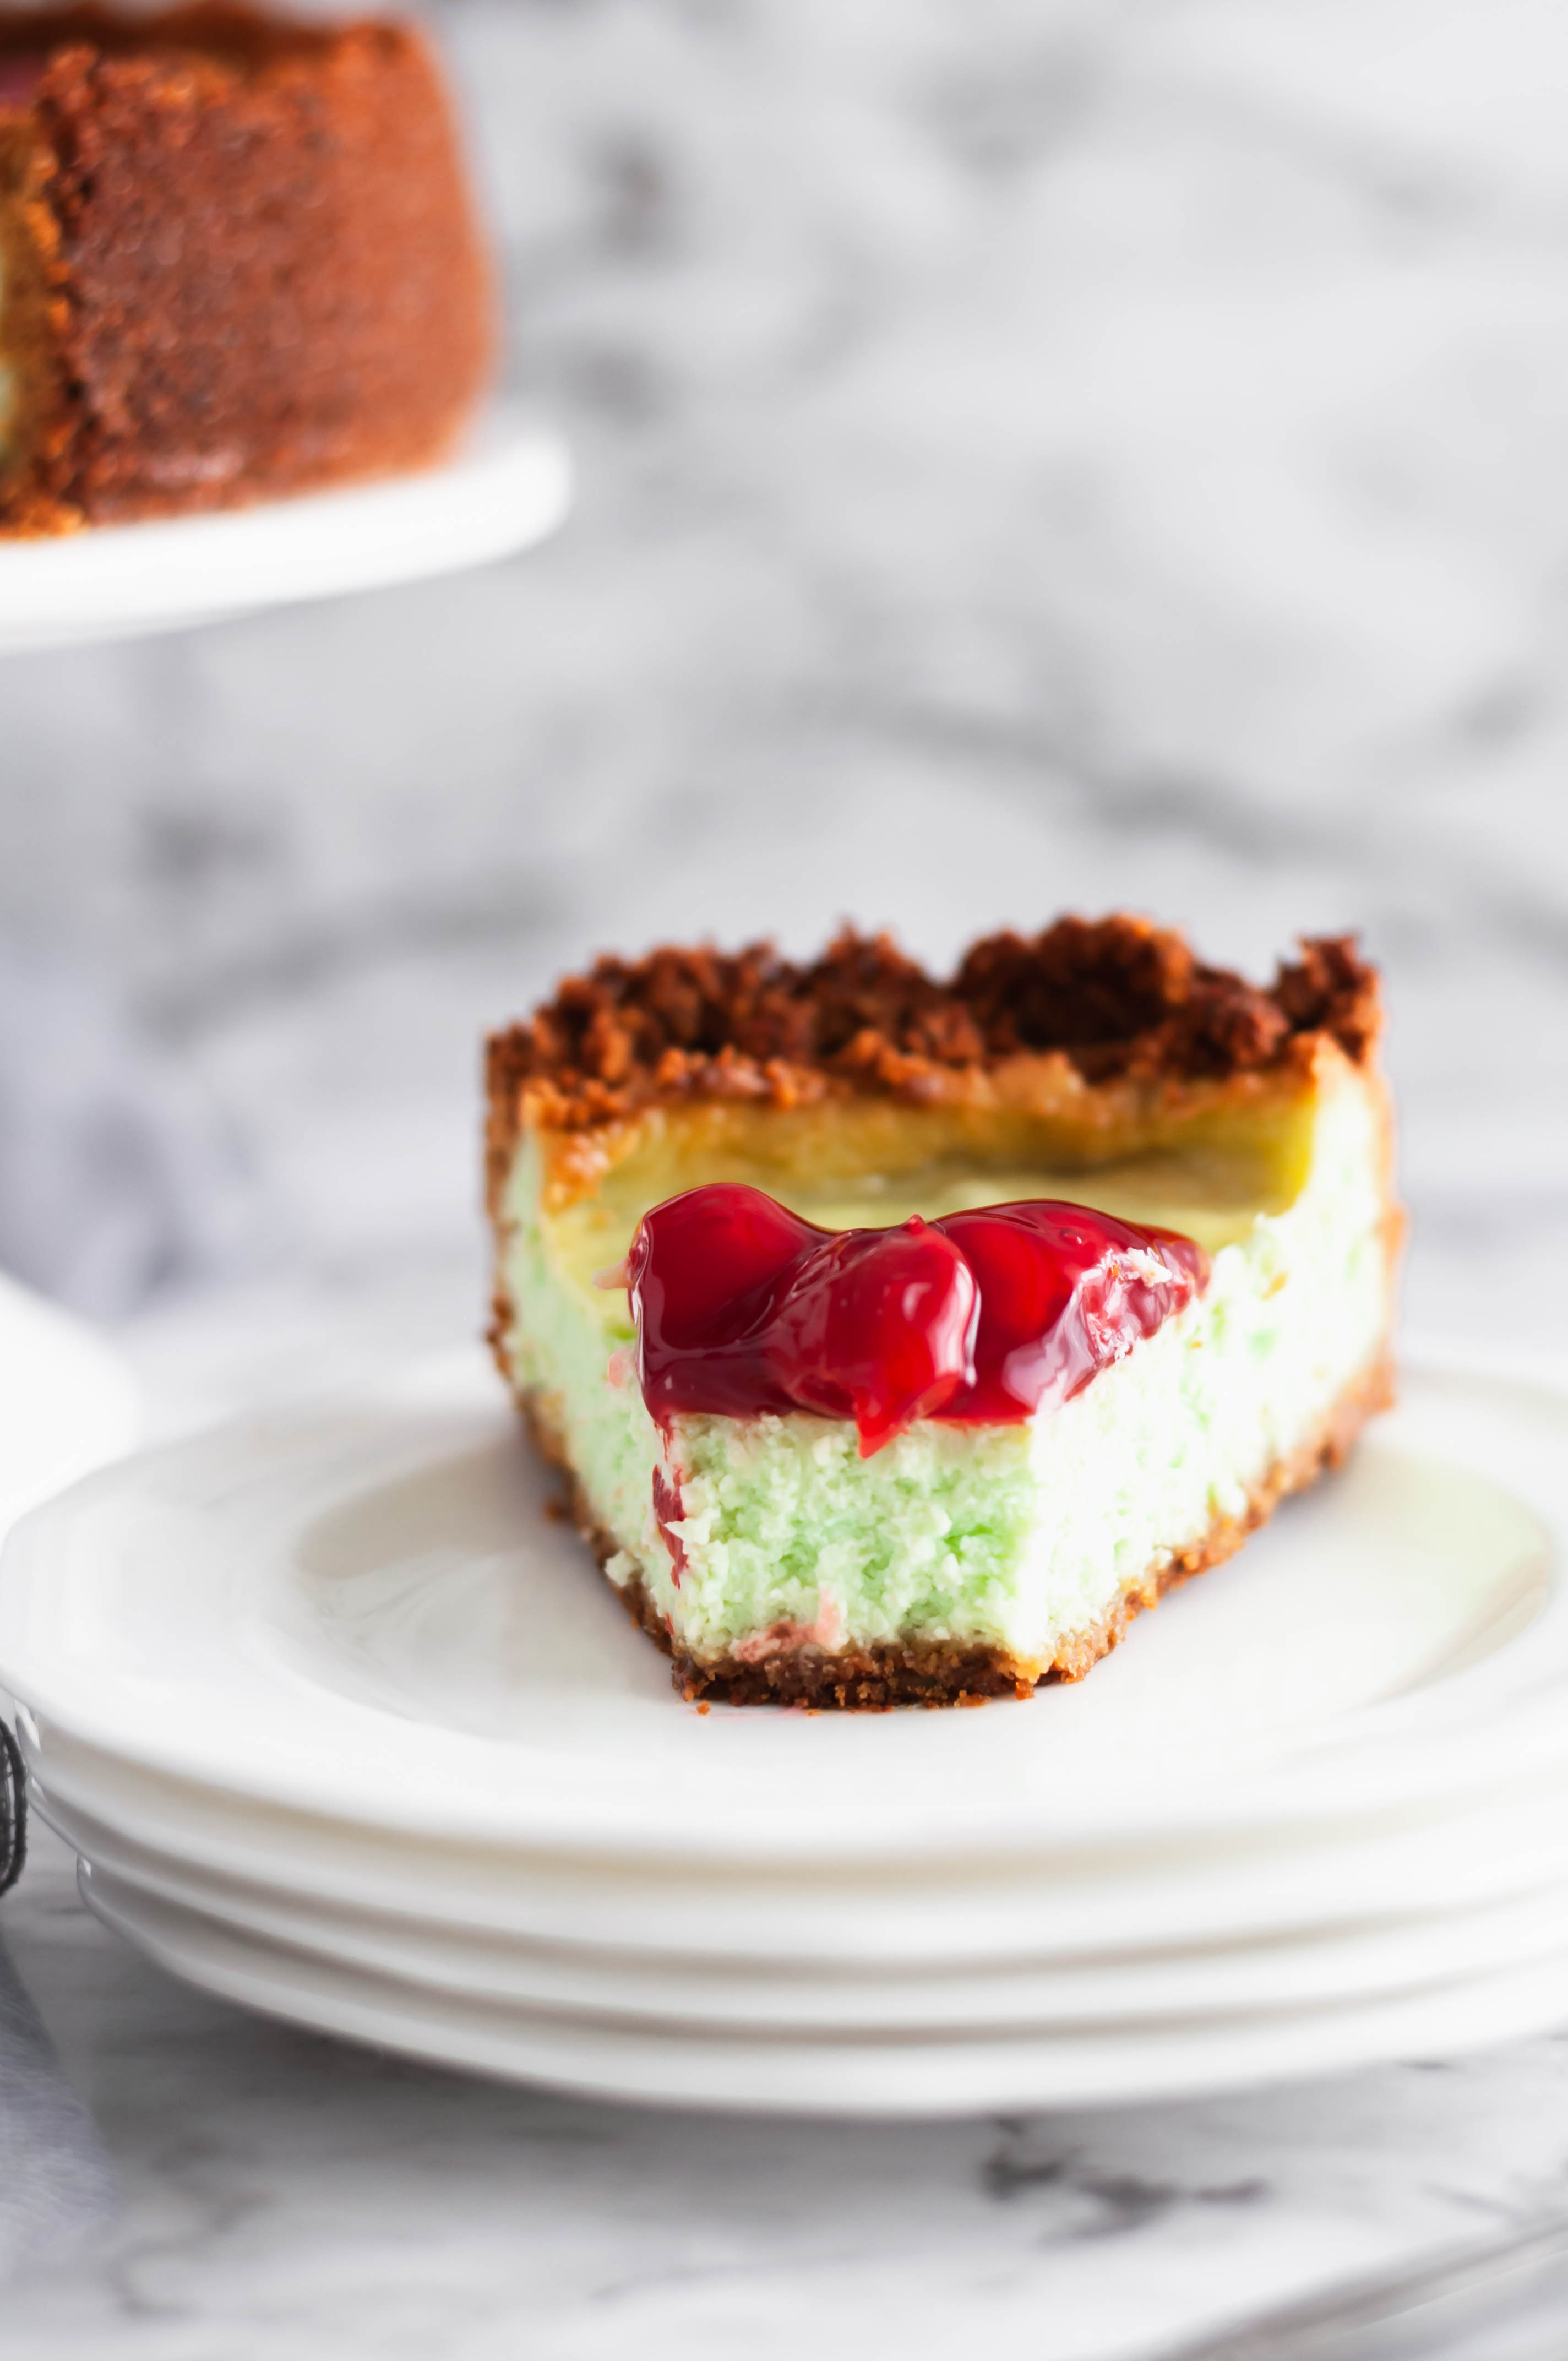 This PIstachio Cheesecake is a delightful holiday dessert. Thick, creamy cheesecake studded with pistachio flavor throughout the filling and crust. Top with cherries to make it extra festive.